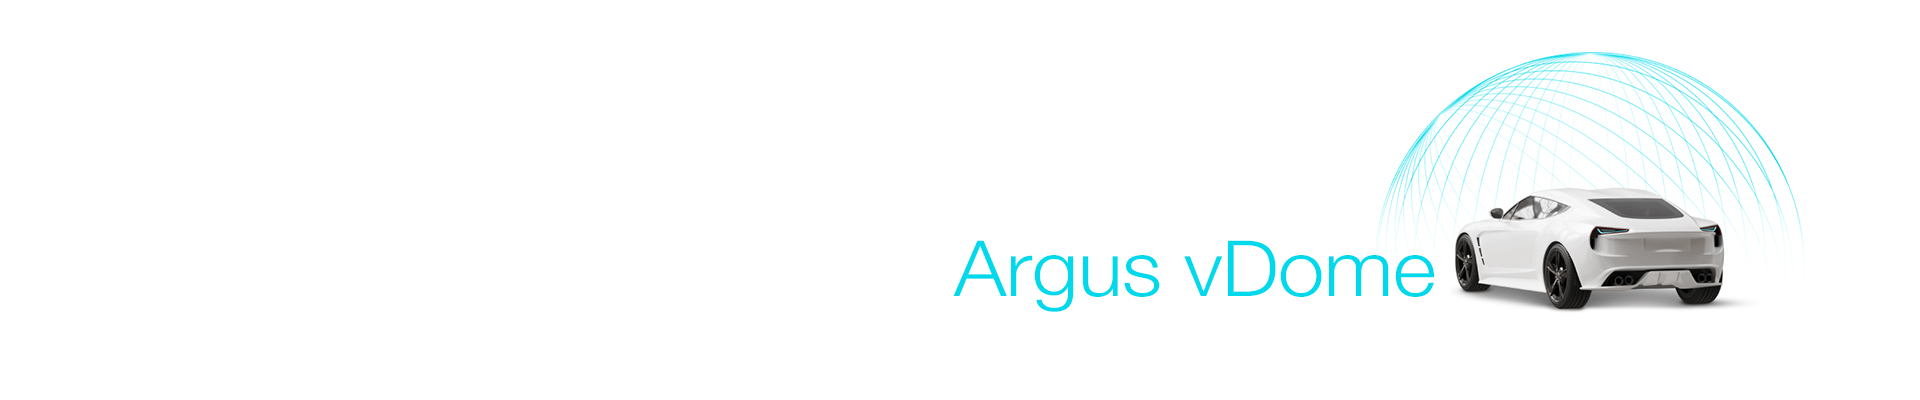 Argus Cyber Security Unveils Groundbreaking Aftermarket Product to Prevent Cyber Vehicle Theft  